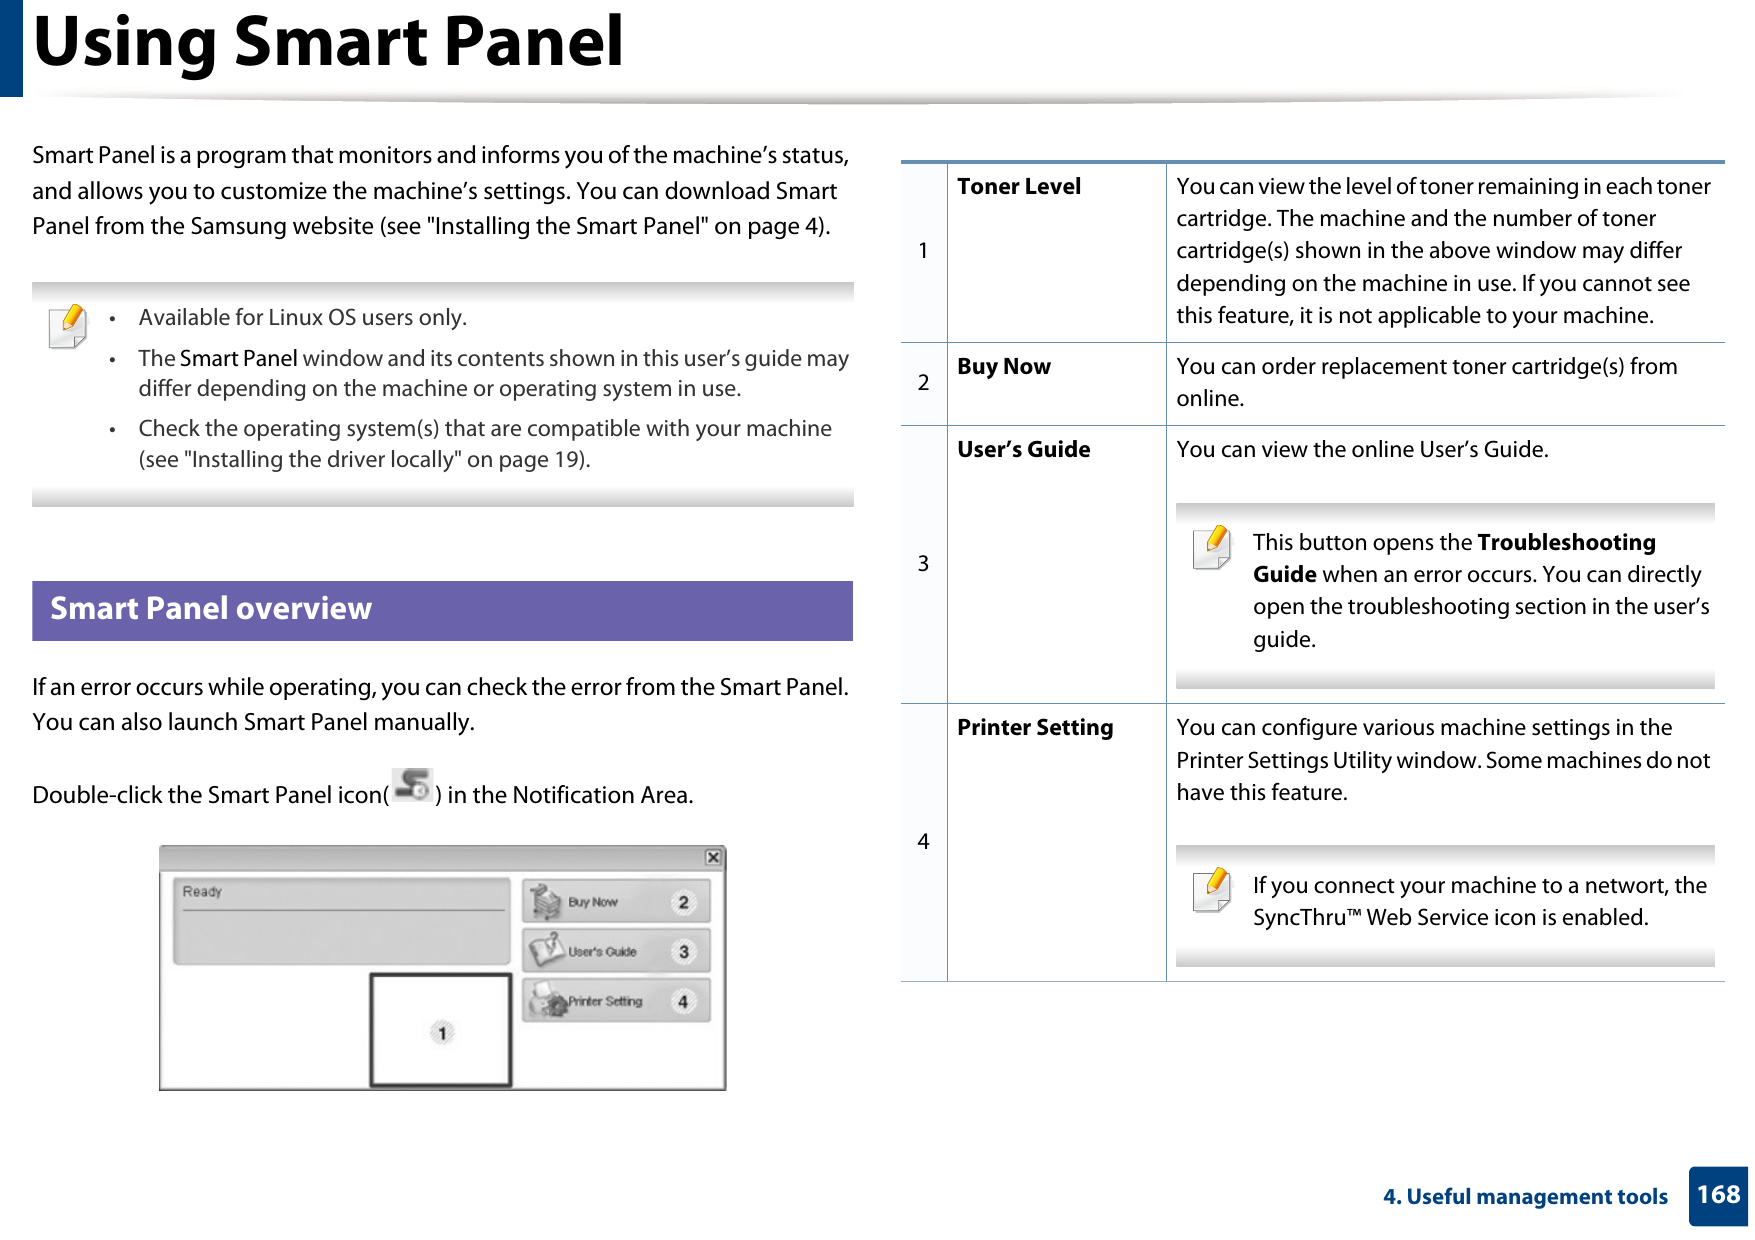 1684. Useful management toolsUsing Smart PanelSmart Panel is a program that monitors and informs you of the machine’s status, and allows you to customize the machine’s settings. You can download Smart Panel from the Samsung website (see &quot;Installing the Smart Panel&quot; on page 4). • Available for Linux OS users only.• The Smart Panel window and its contents shown in this user’s guide may differ depending on the machine or operating system in use.• Check the operating system(s) that are compatible with your machine (see &quot;Installing the driver locally&quot; on page 19). 8 Smart Panel overviewIf an error occurs while operating, you can check the error from the Smart Panel. You can also launch Smart Panel manually.Double-click the Smart Panel icon( ) in the Notification Area.1Toner Level You can view the level of toner remaining in each toner cartridge. The machine and the number of toner cartridge(s) shown in the above window may differ depending on the machine in use. If you cannot see this feature, it is not applicable to your machine.2Buy Now You can order replacement toner cartridge(s) from online.3User’s Guide You can view the online User’s Guide. This button opens the Troubleshooting Guide when an error occurs. You can directly open the troubleshooting section in the user’s guide.  4Printer Setting You can configure various machine settings in the Printer Settings Utility window. Some machines do not have this feature. If you connect your machine to a networt, the SyncThru™ Web Service icon is enabled. 